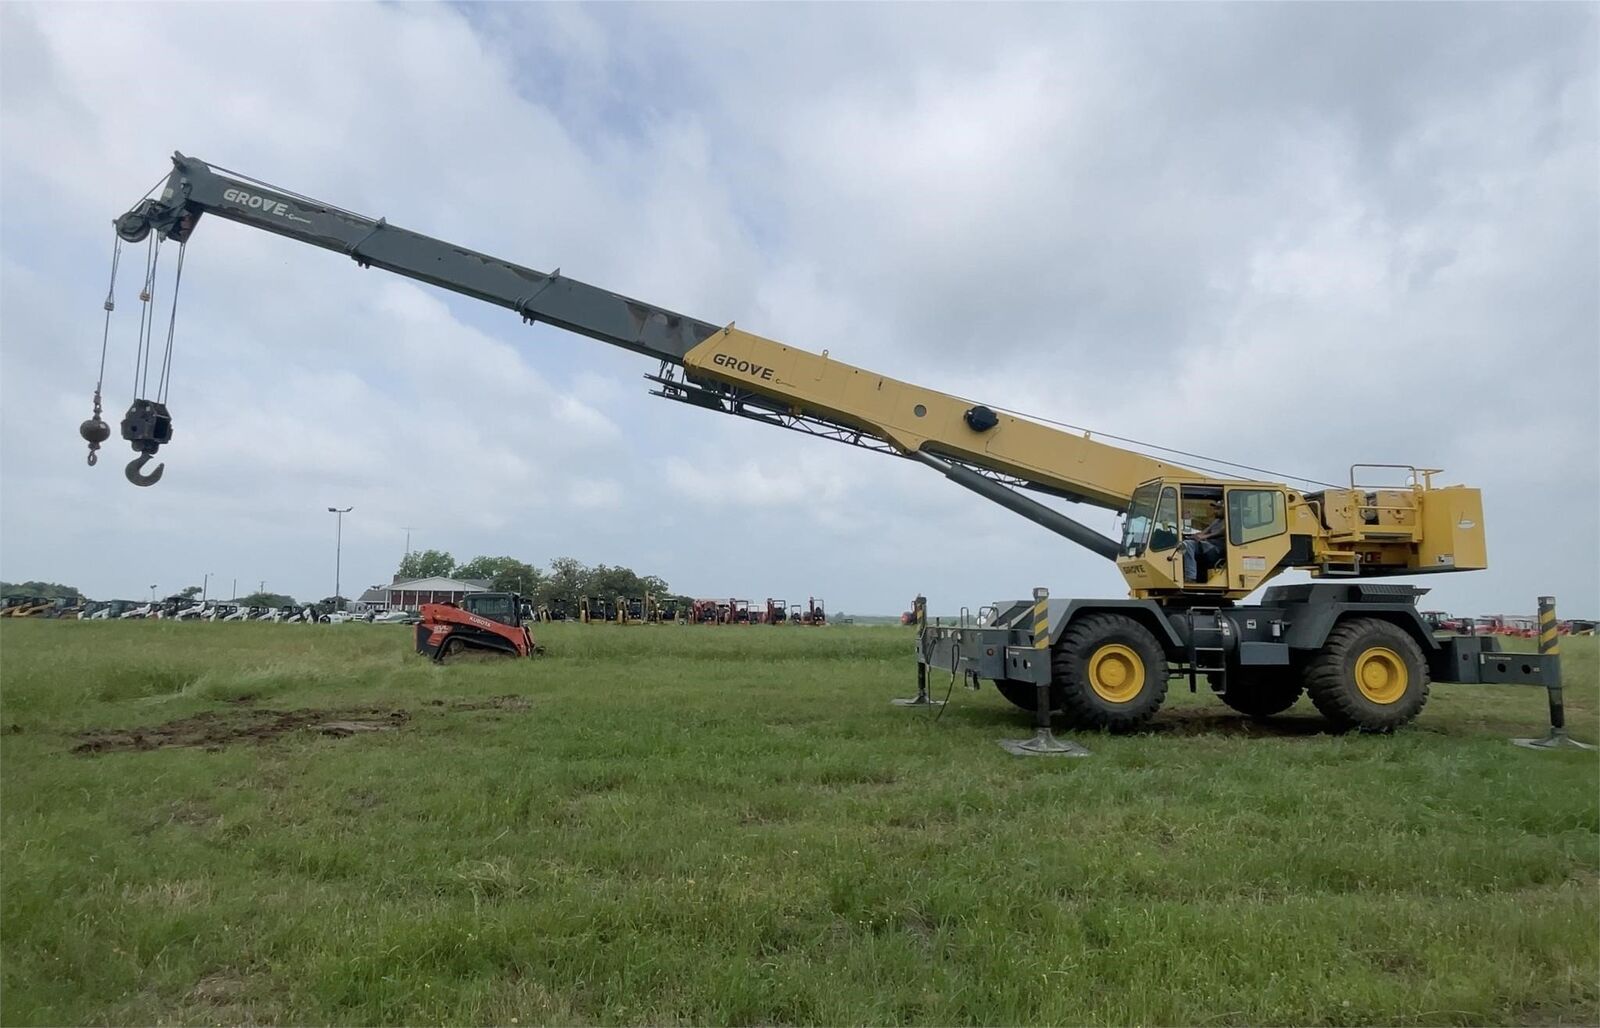 THIS IS A HARD-TO-FIND LOW HOUR 50 TON ROUGH TERRAIN CRANE. GREAT SHAPE AND READ